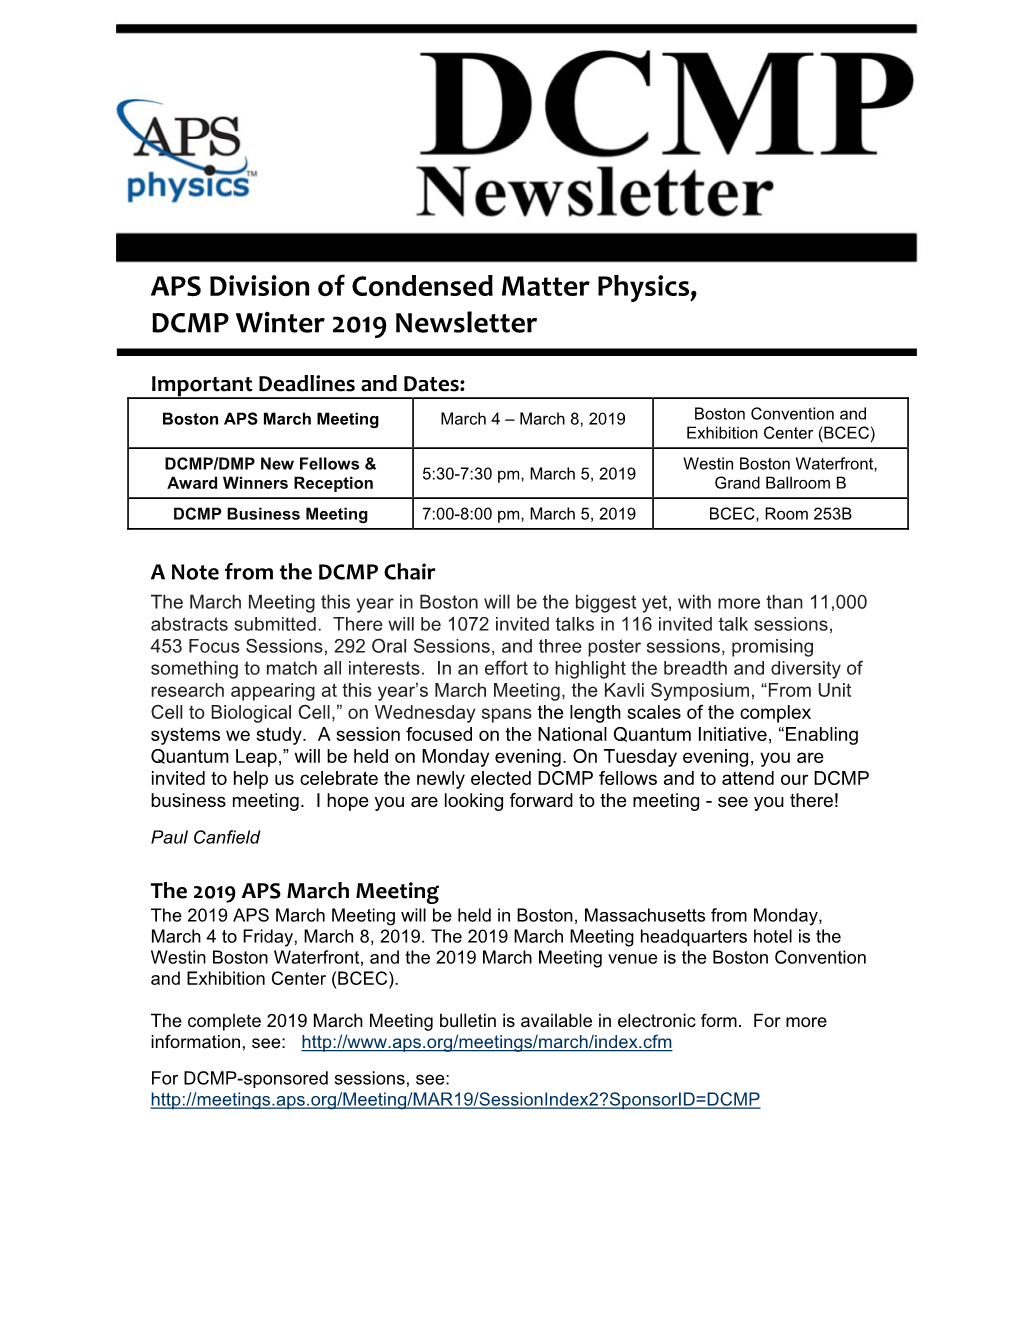 APS Division of Condensed Matter Physics, DCMP Winter 2019 Newsletter